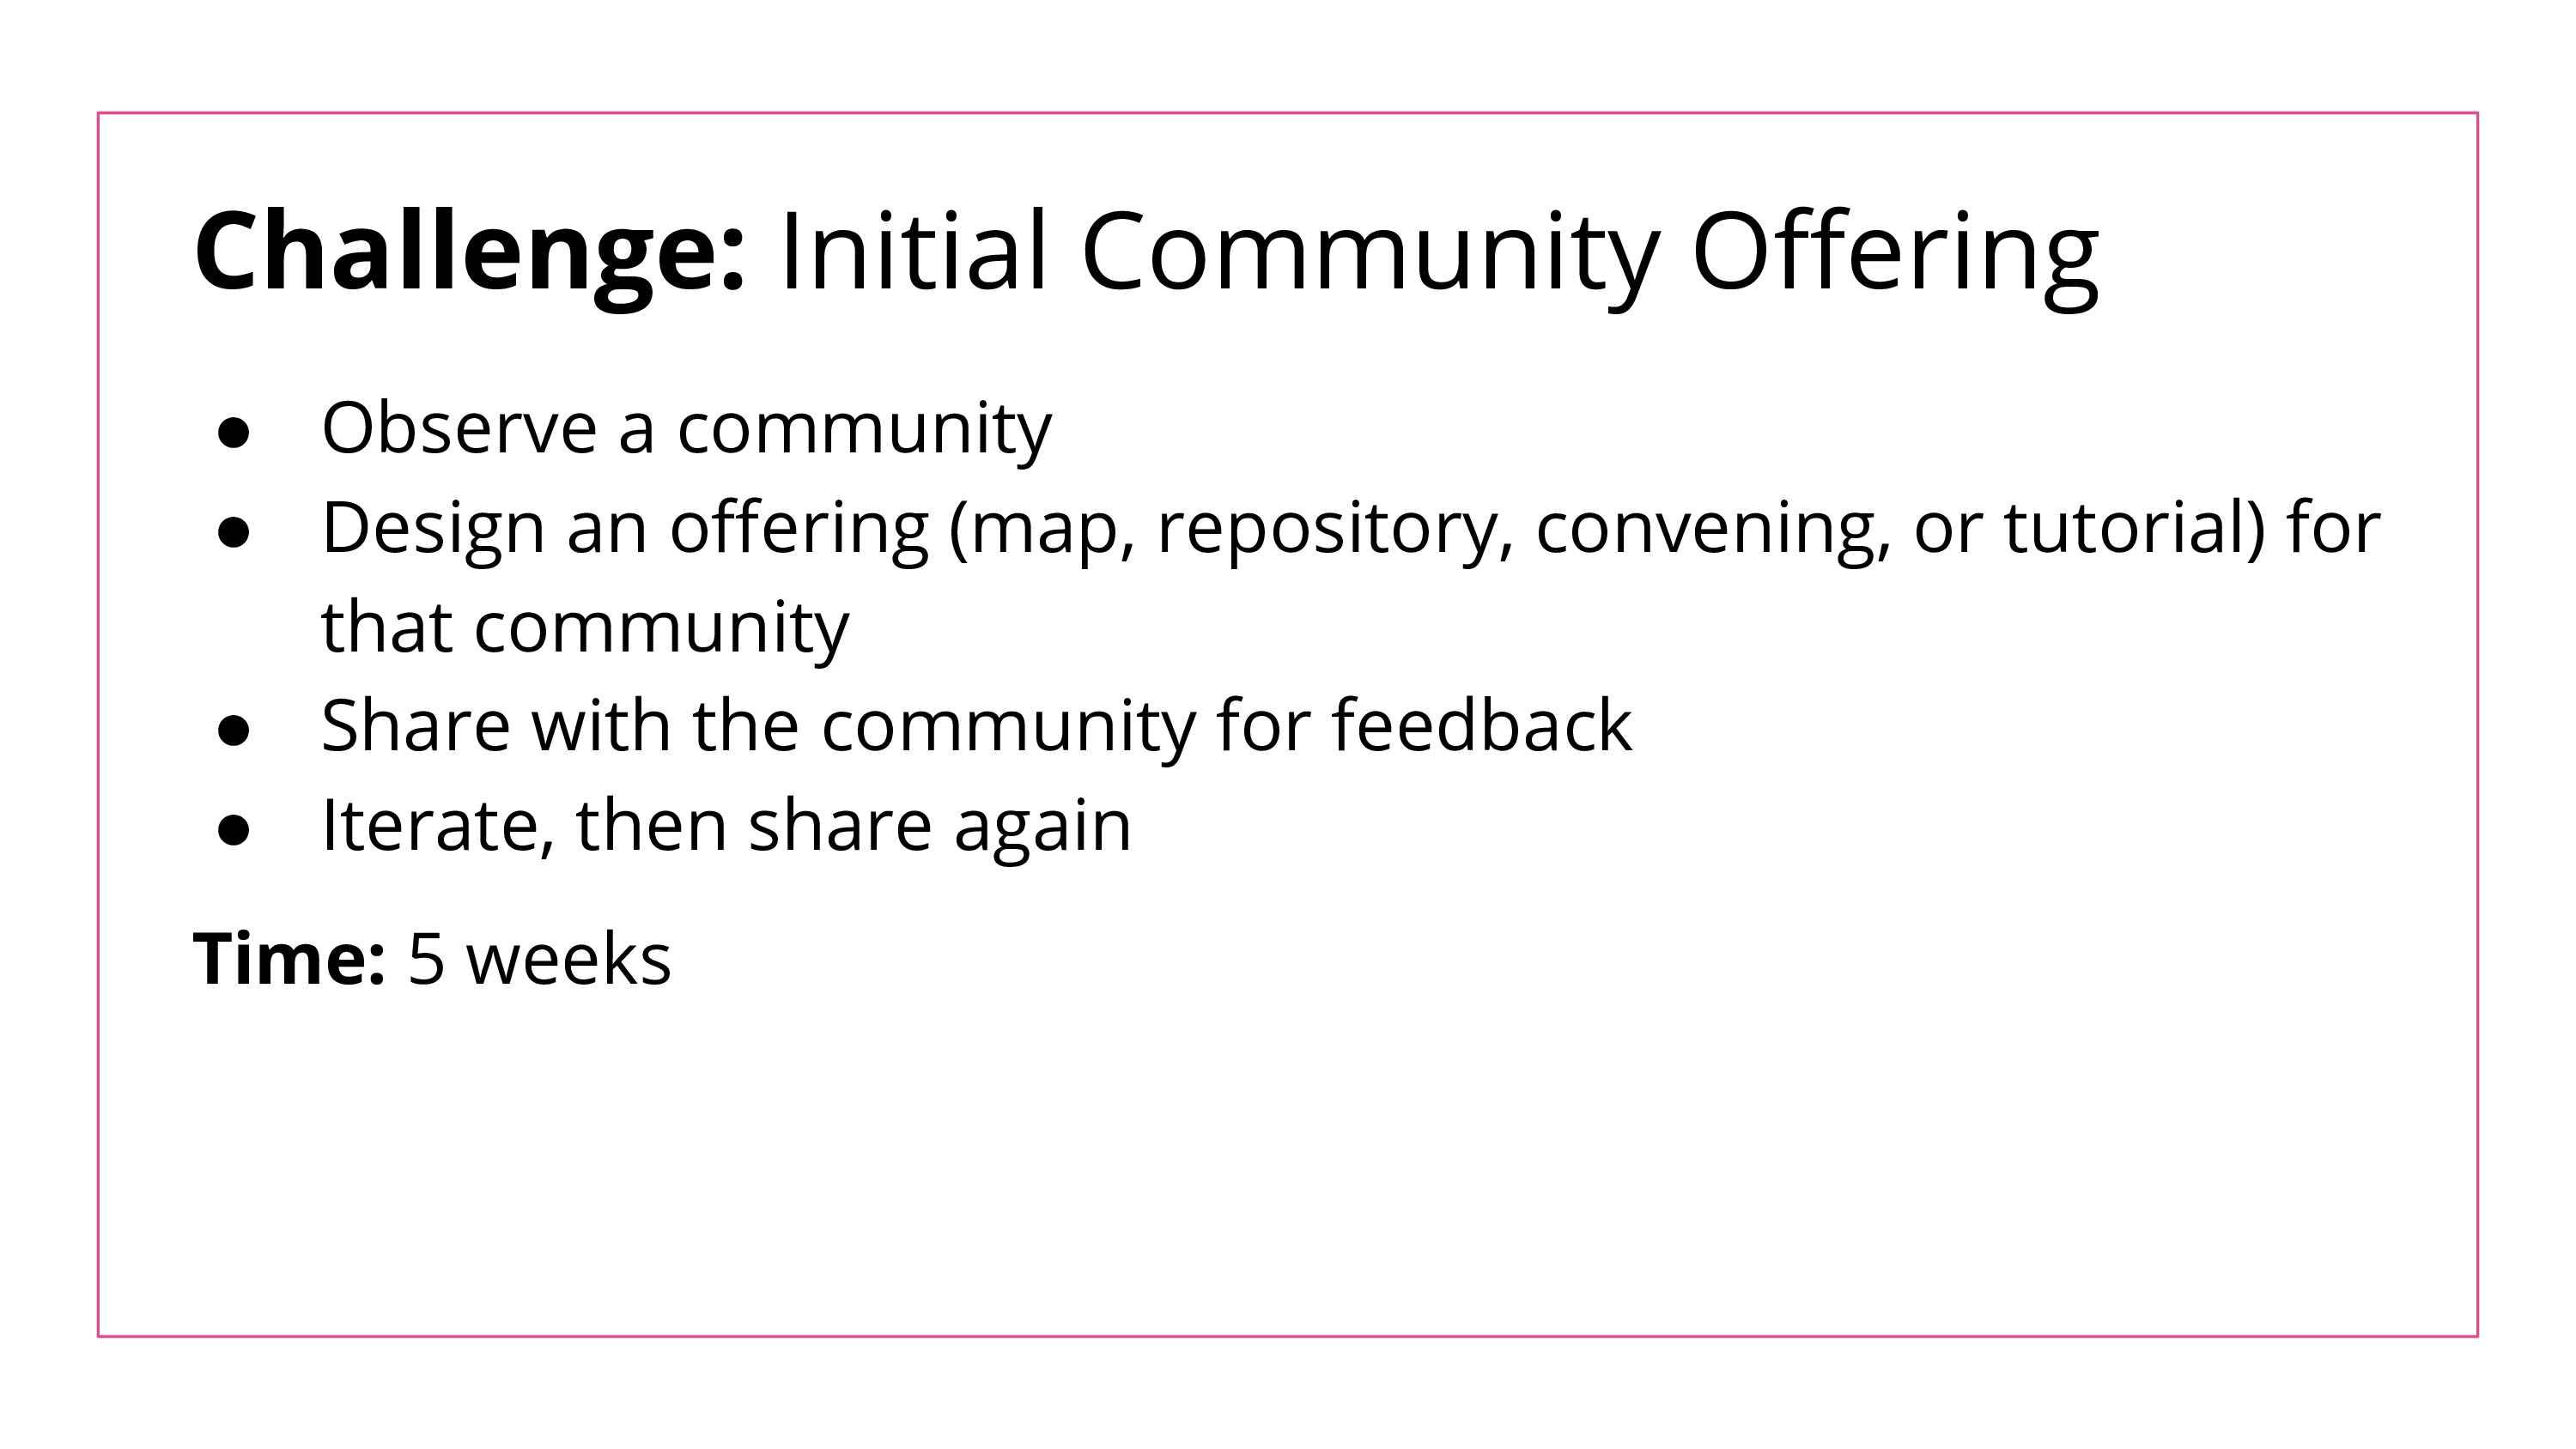 The Initial Community Offering Challenge lasts for 5 weeks. Students are asked to observe a community, design an offering (a map, repository, convening, or tutorial) for that community, share the offering with the community for feedback, and iterate upon it.